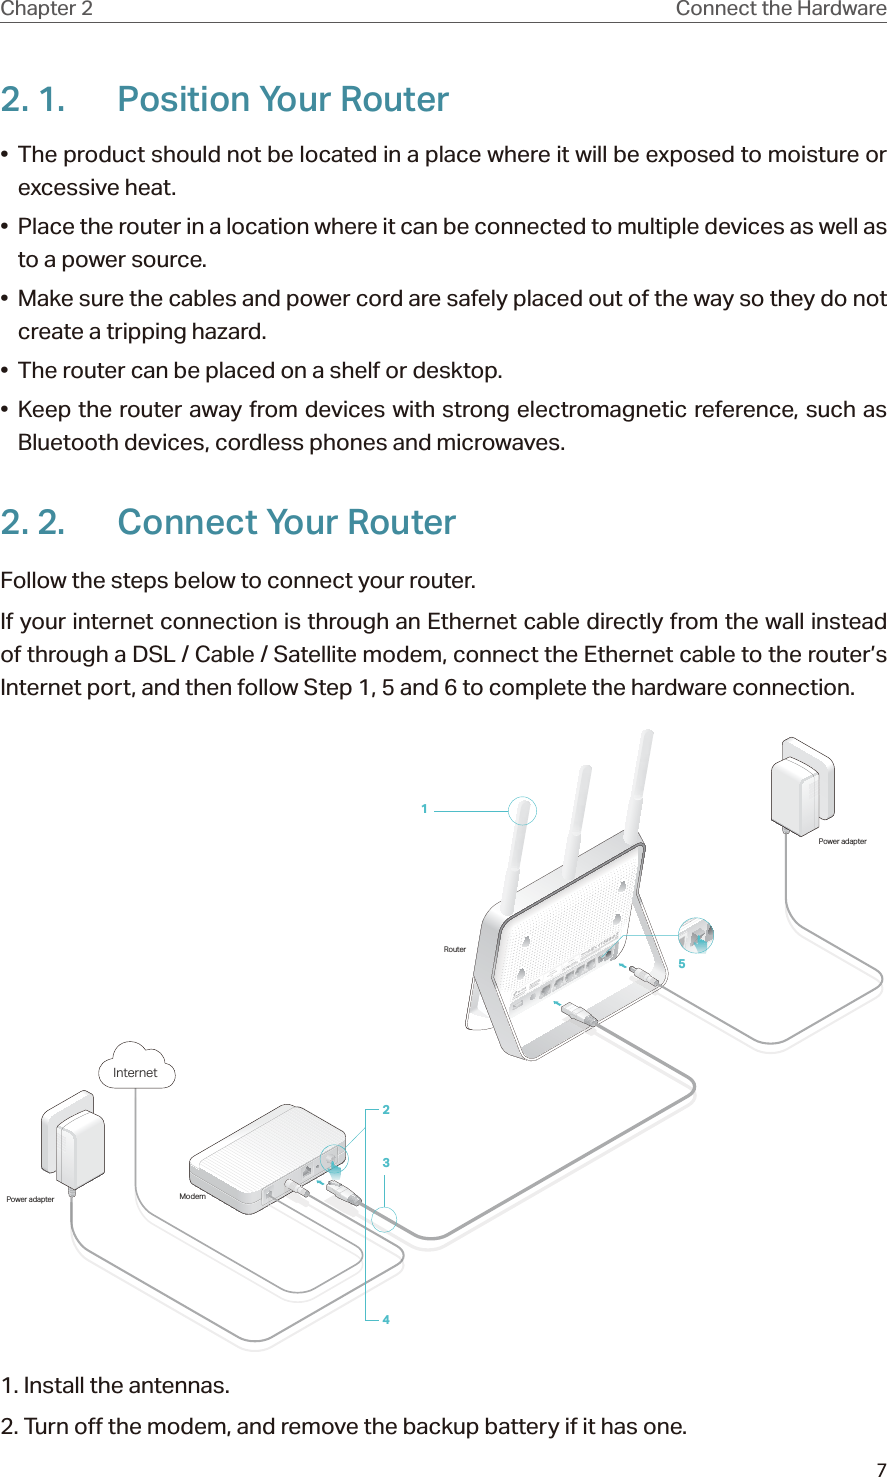 7Chapter 2 Connect the Hardware2. 1.  Position Your Router•  The product should not be located in a place where it will be exposed to moisture or excessive heat.•  Place the router in a location where it can be connected to multiple devices as well as to a power source.•  Make sure the cables and power cord are safely placed out of the way so they do not create a tripping hazard.•  The router can be placed on a shelf or desktop.• Keep the router away from devices with strong electromagnetic reference, such as Bluetooth devices, cordless phones and microwaves.2. 2.  Connect Your RouterFollow the steps below to connect your router.If your internet connection is through an Ethernet cable directly from the wall instead of through a DSL / Cable / Satellite modem, connect the Ethernet cable to the router’s Internet port, and then follow Step 1, 5 and 6 to complete the hardware connection.ModemPower adapterRouterPower adapter5Internet24311. Install the antennas.2. Turn off the modem, and remove the backup battery if it has one.